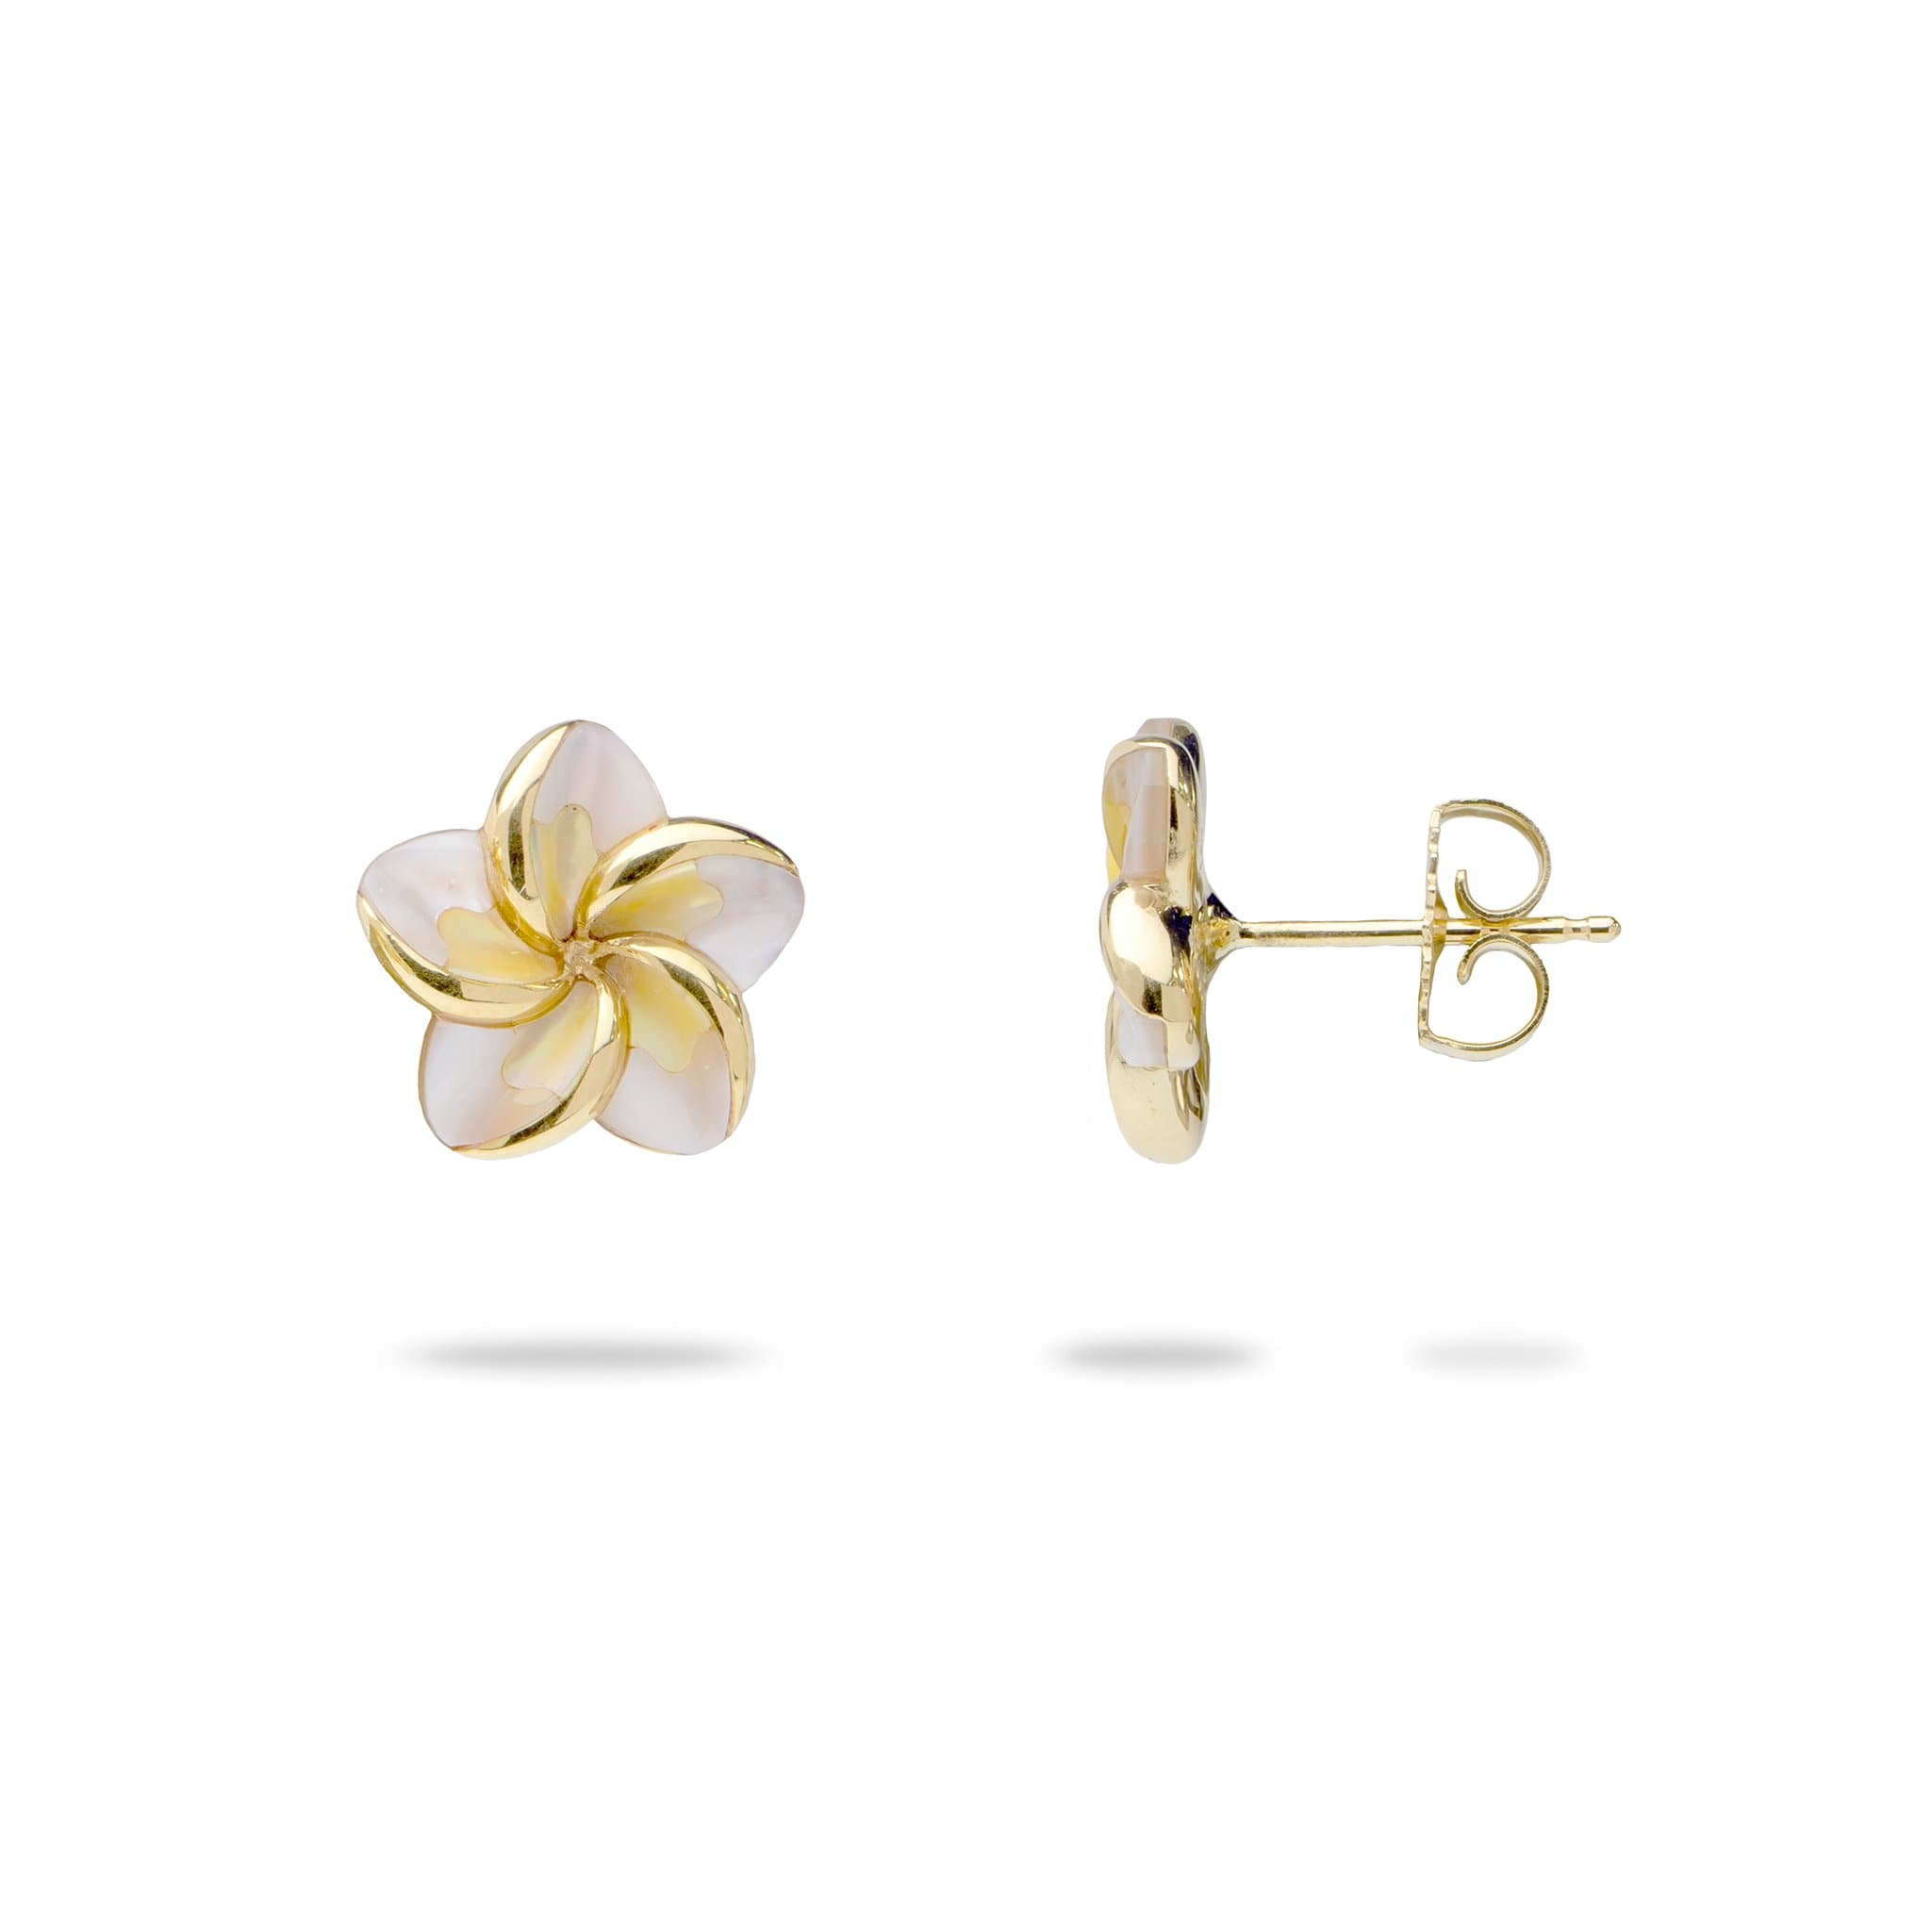 Plumeria Earrings in Gold - 18mm – Maui Divers Jewelry